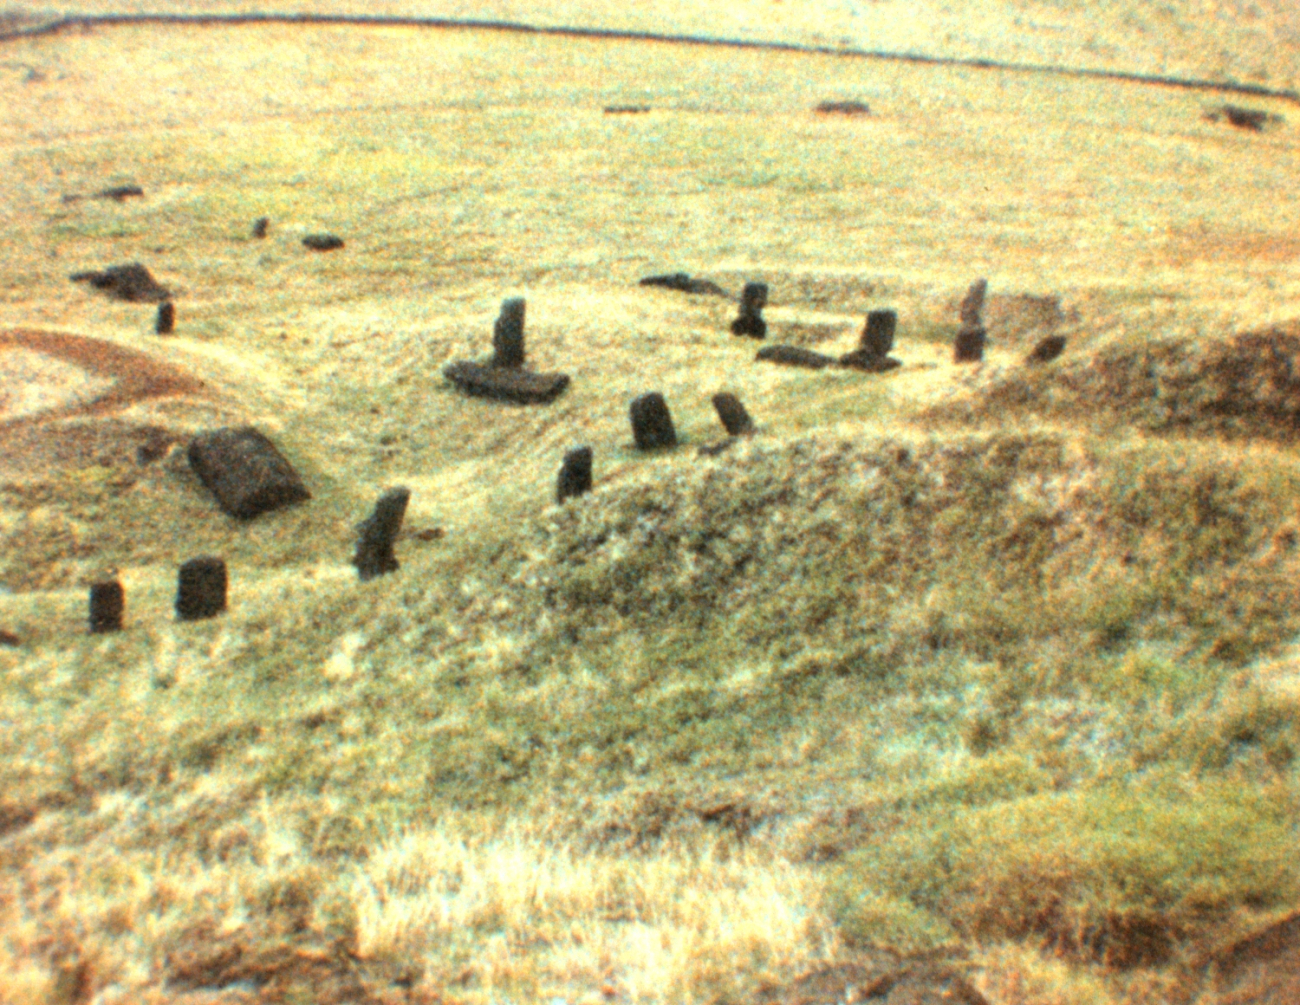 The stone quarry at Easter Island